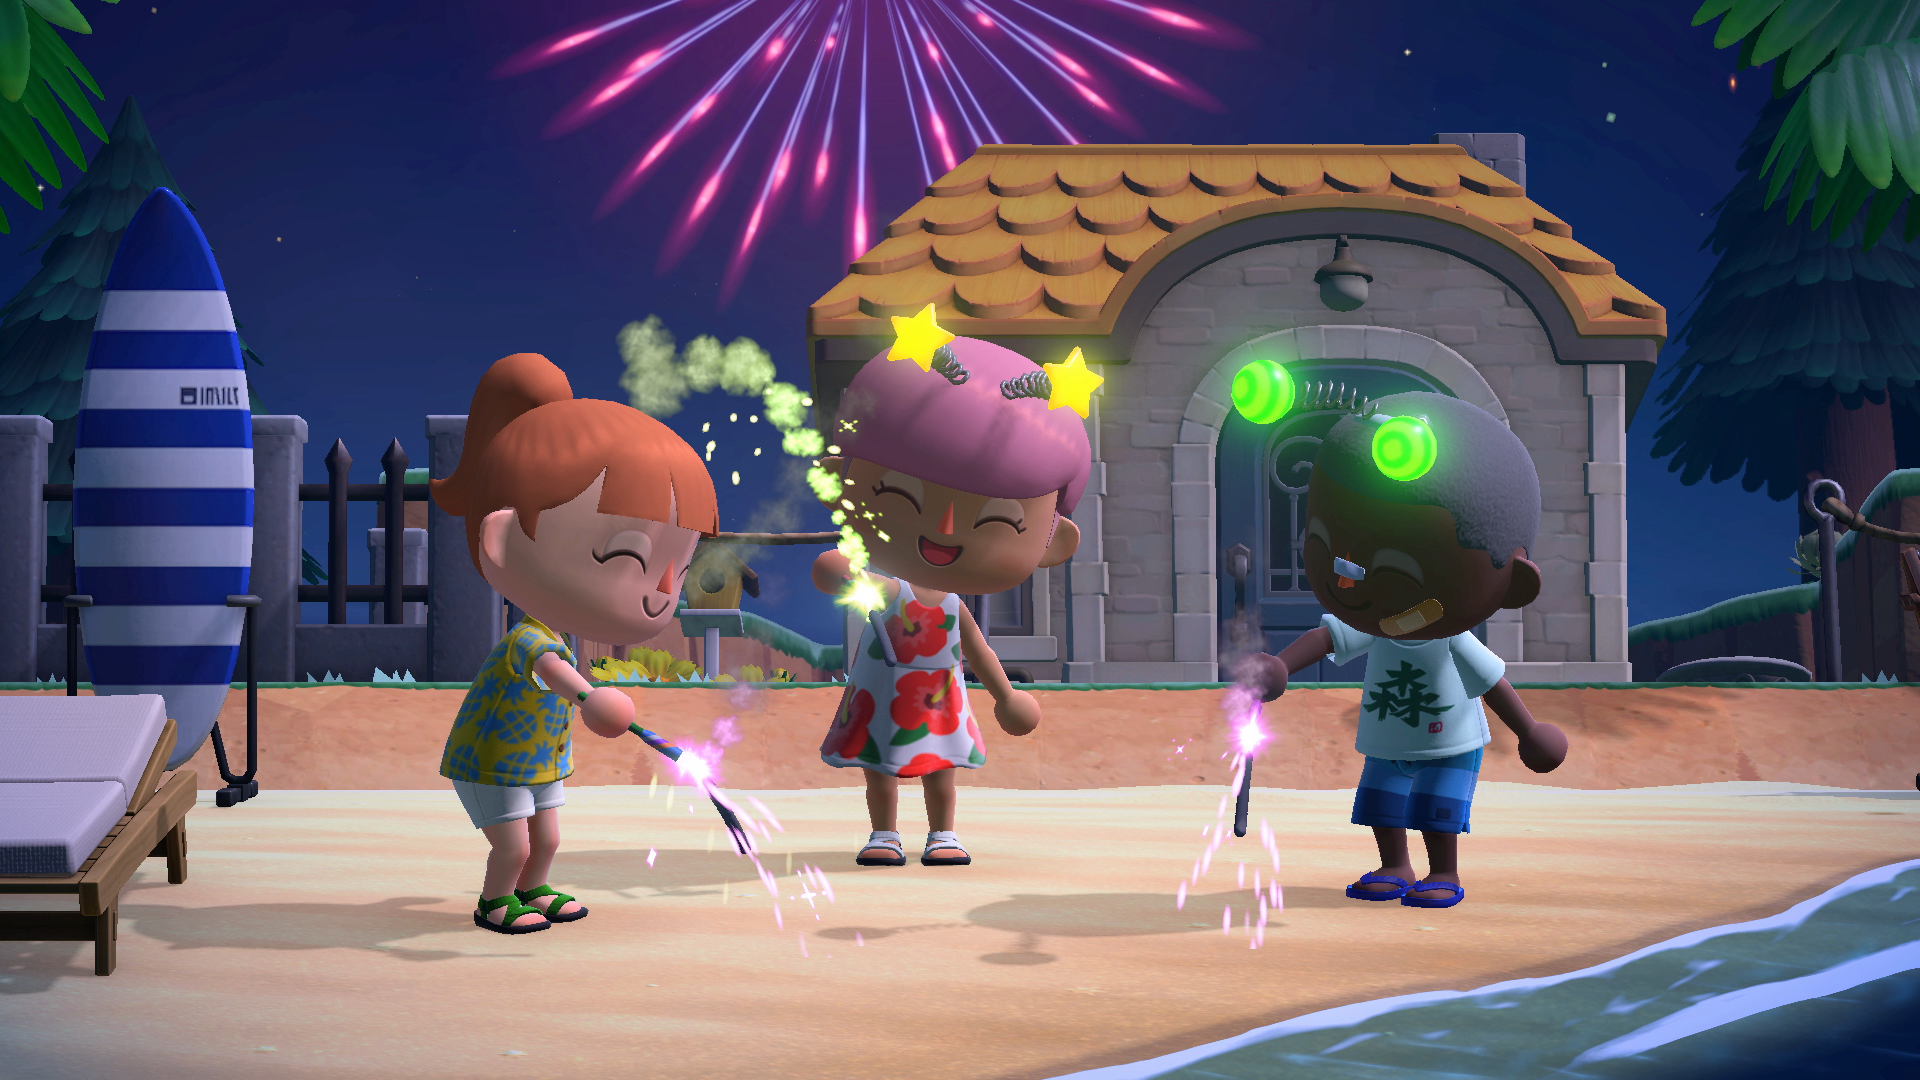 Switch_ACNH_SummerUpdate-02-2020_screen_05 Fireworks Shows, Dreaming, and More Make Their Way to Animal Crossing: New Horizons